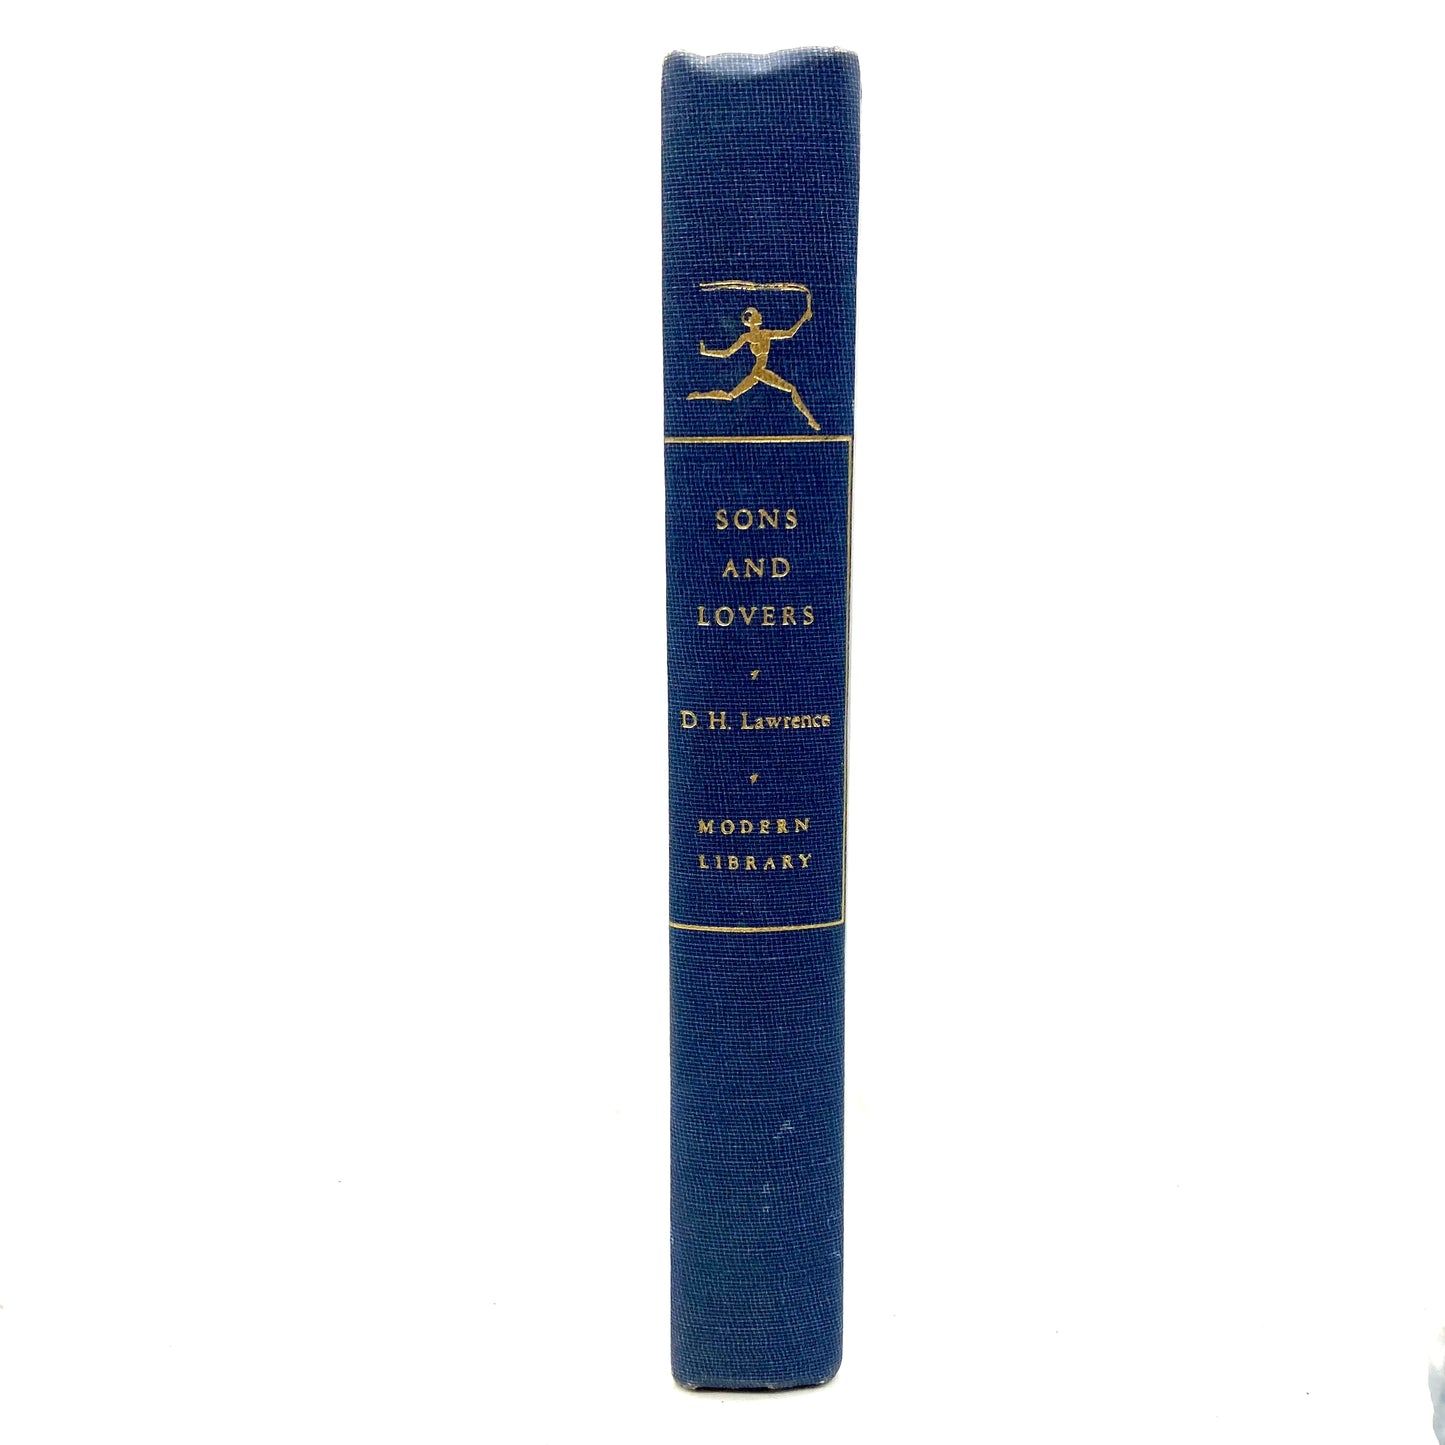 LAWRENCE, D.H. "Sons and Lovers" [Modern Library, 1962] - Buzz Bookstore